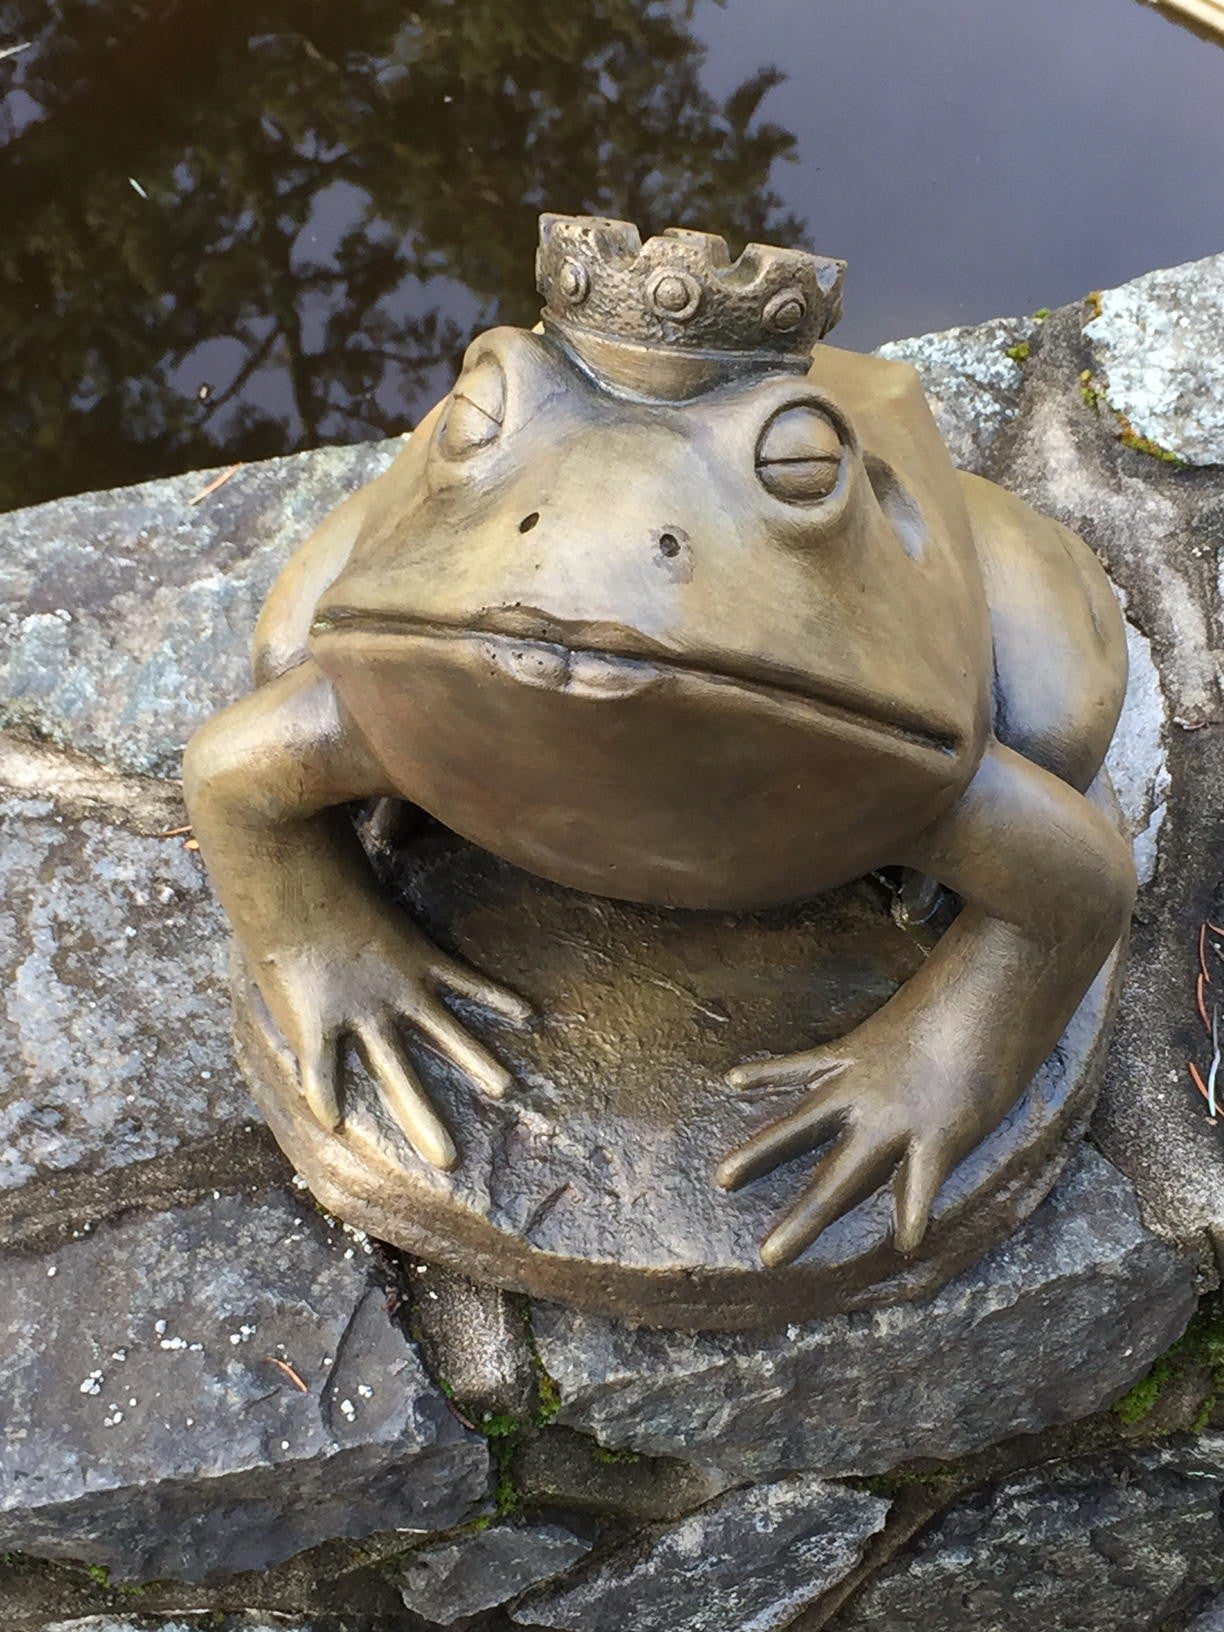 Frog Prince in York Stone